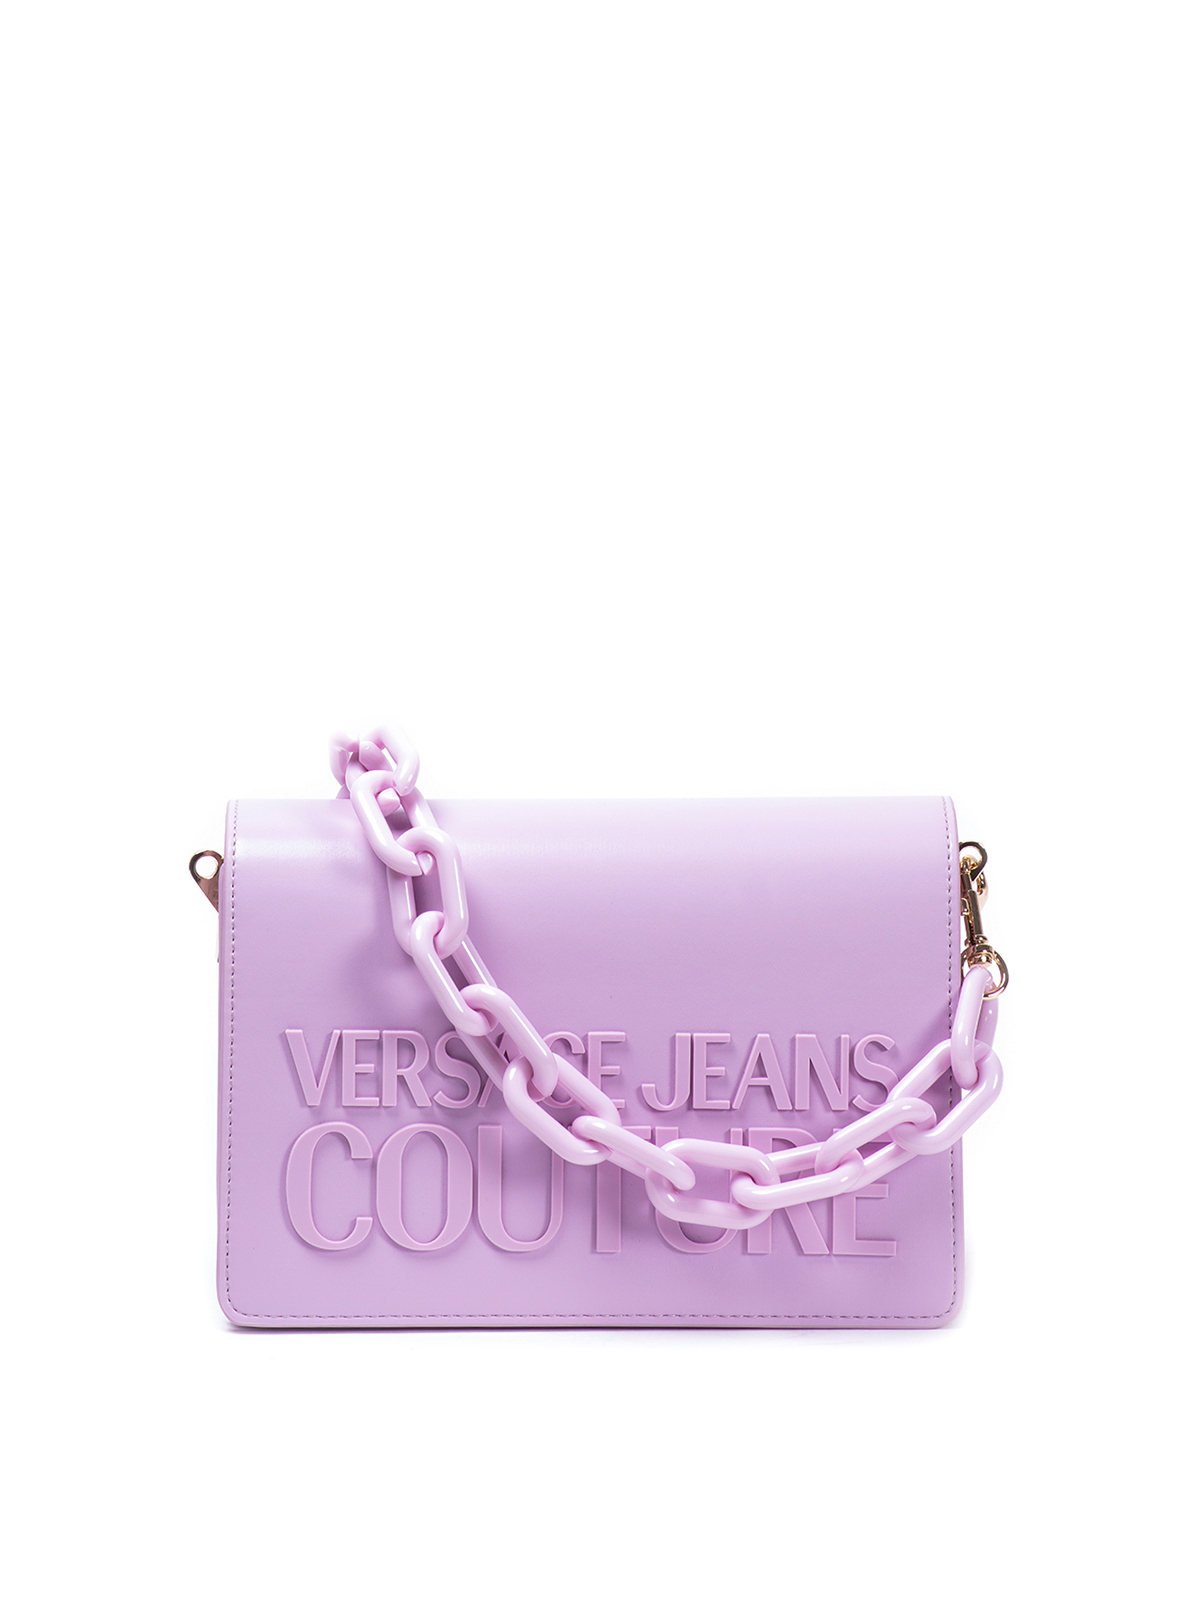 Versace Jeans Couture Institutional Logo Crossbody Bag